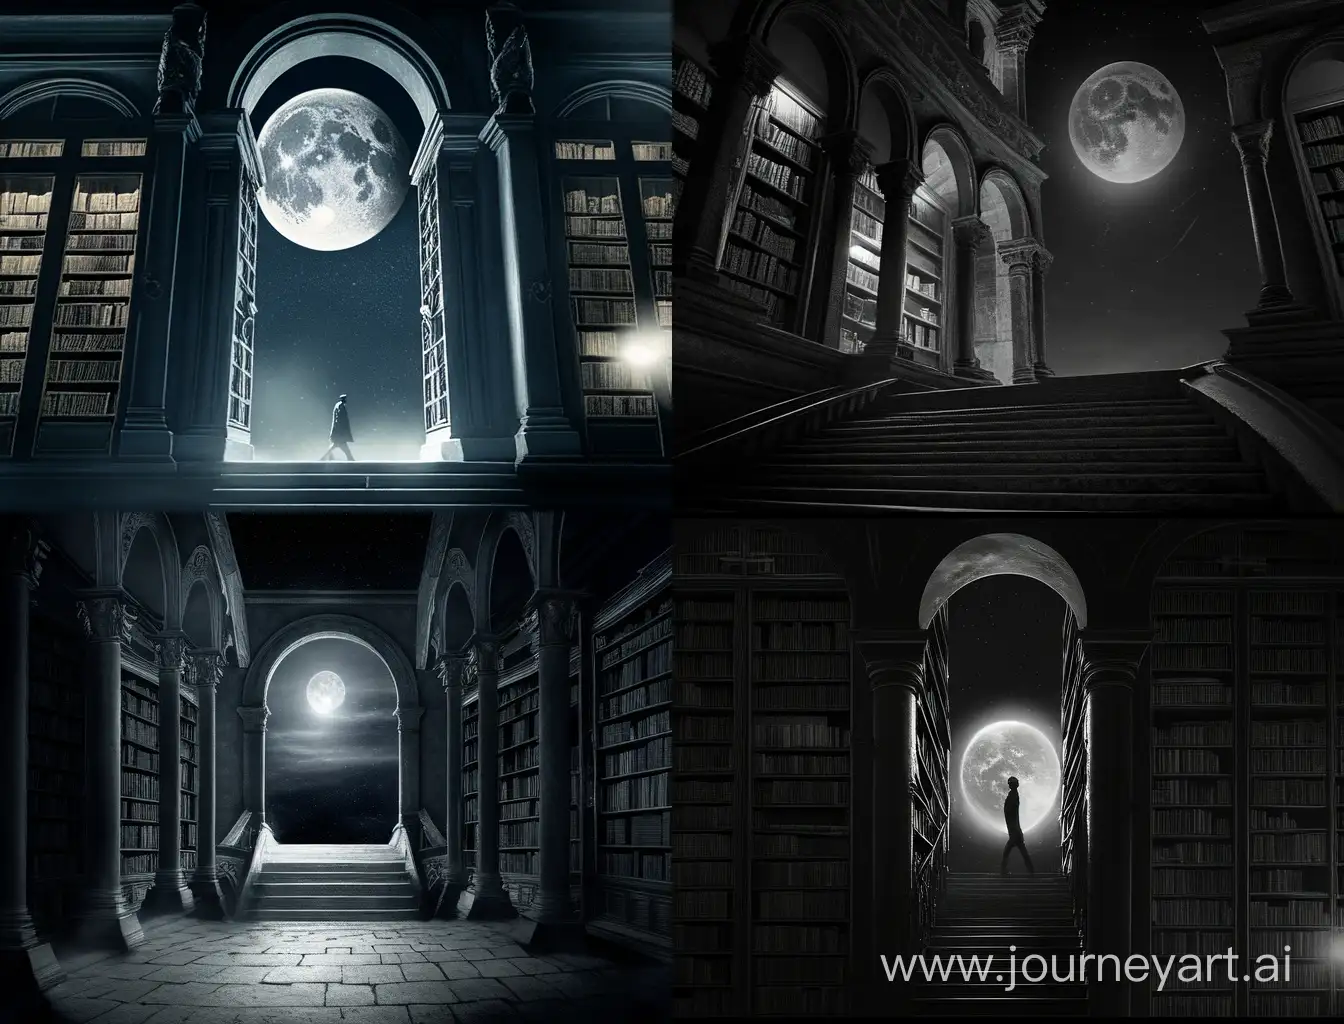 Enigmatic-Exploration-Solitary-Seeker-Enters-Moonlit-Library-of-Secrets